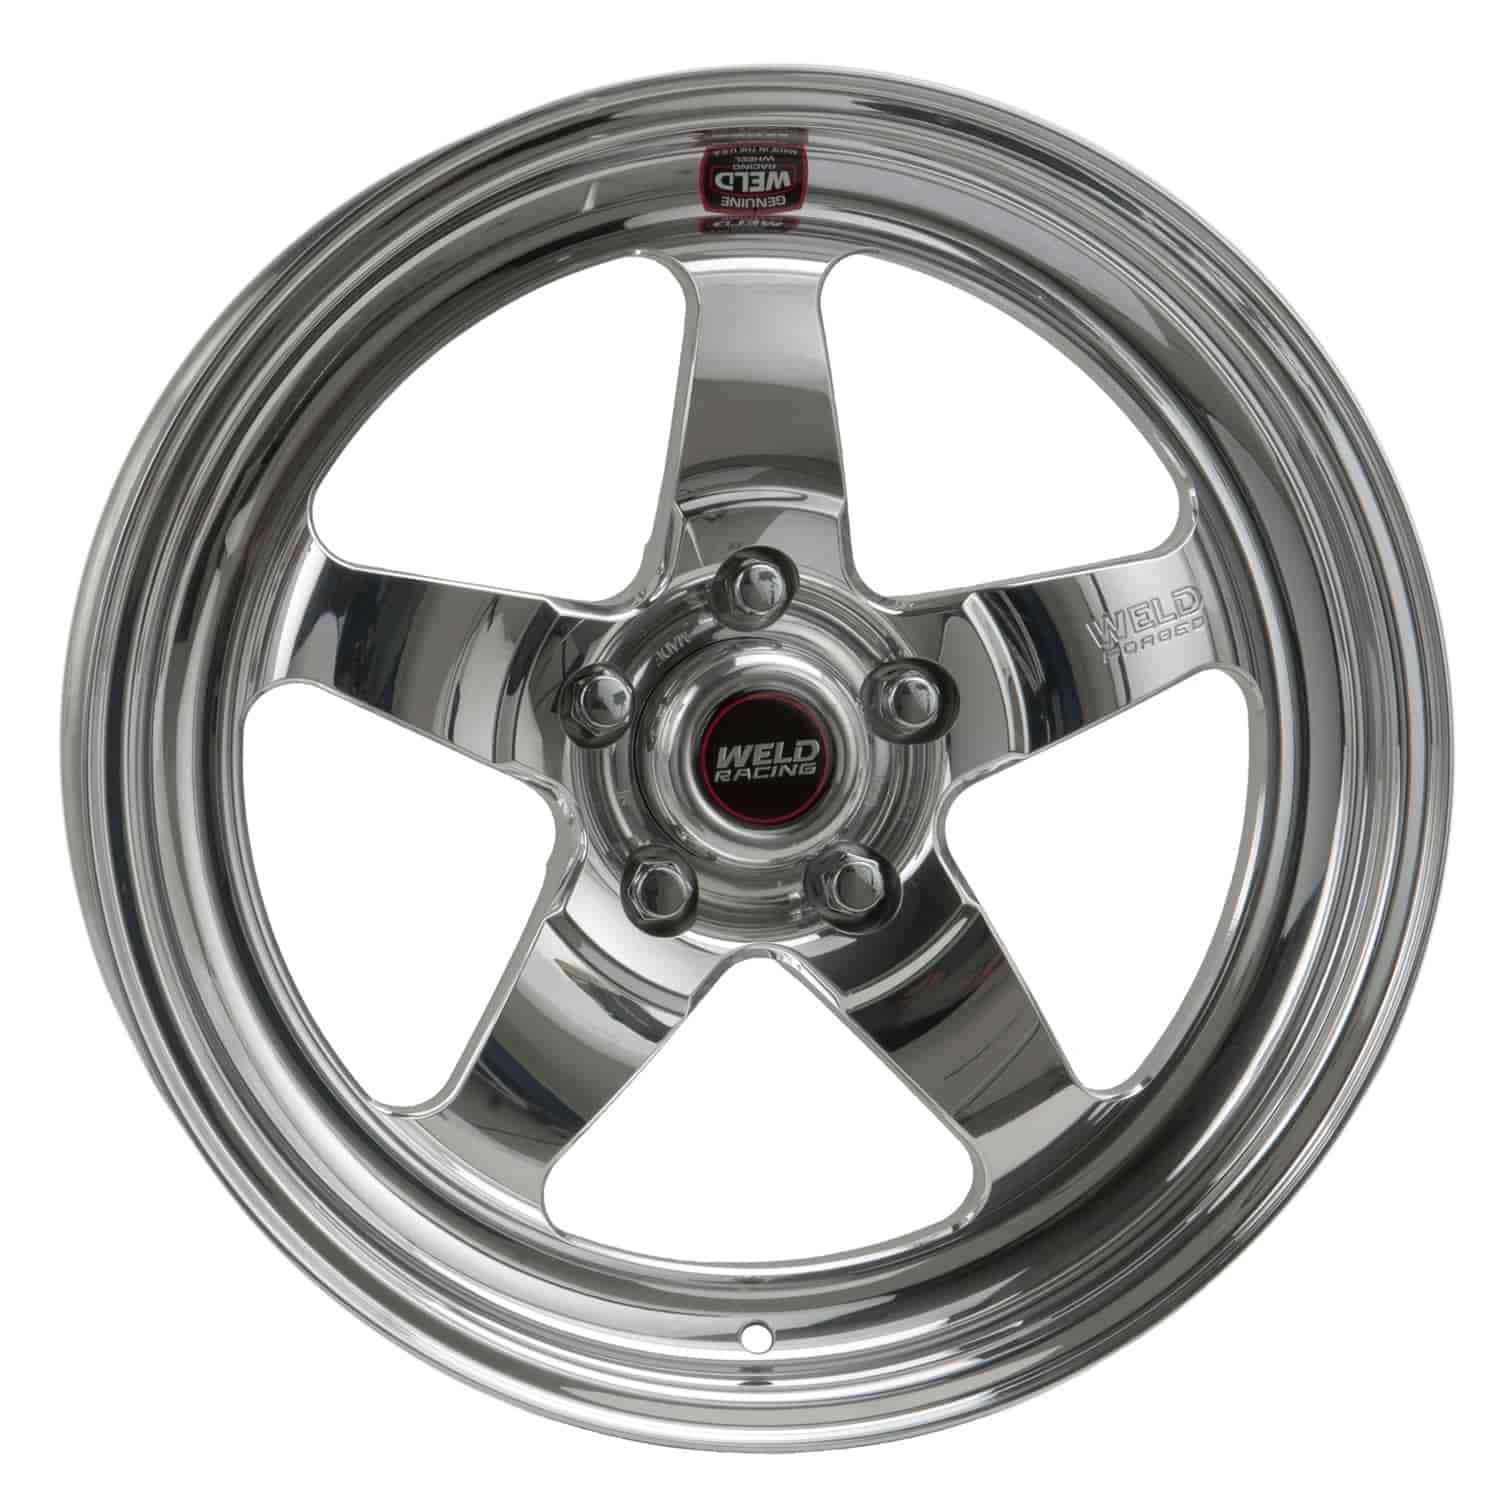 RT-S Series Wheel Size: 15" x 9" Bolt Circle: 5 x 4-1/2" Rear Spacing: 6-1/2" Offset: +34.61mm